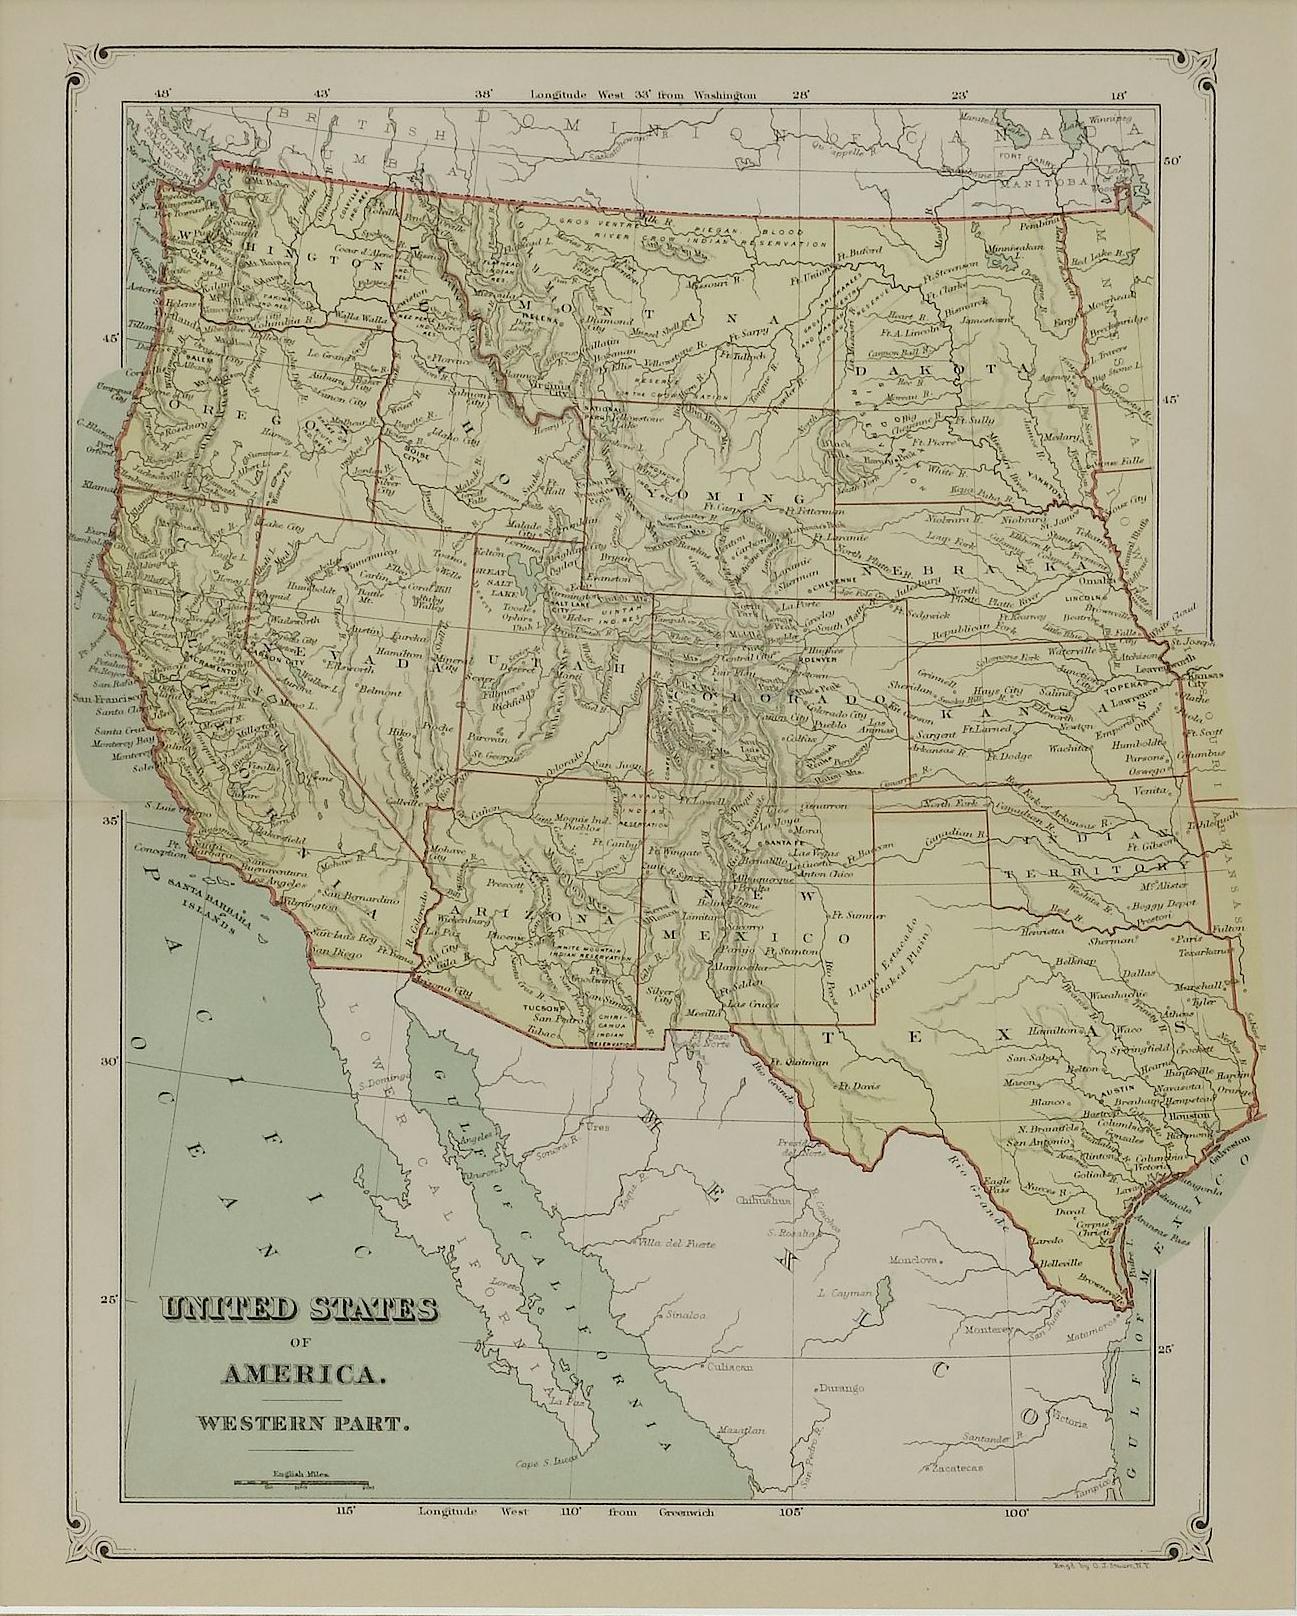 This colorful original map, titled “United States of America, Western Part,” was issued in Volume 16 of “The American Cyclopædia.” A detailed reference map, the map was printed in color and engraved by O. J. Stuart in New York. 

The map depicts